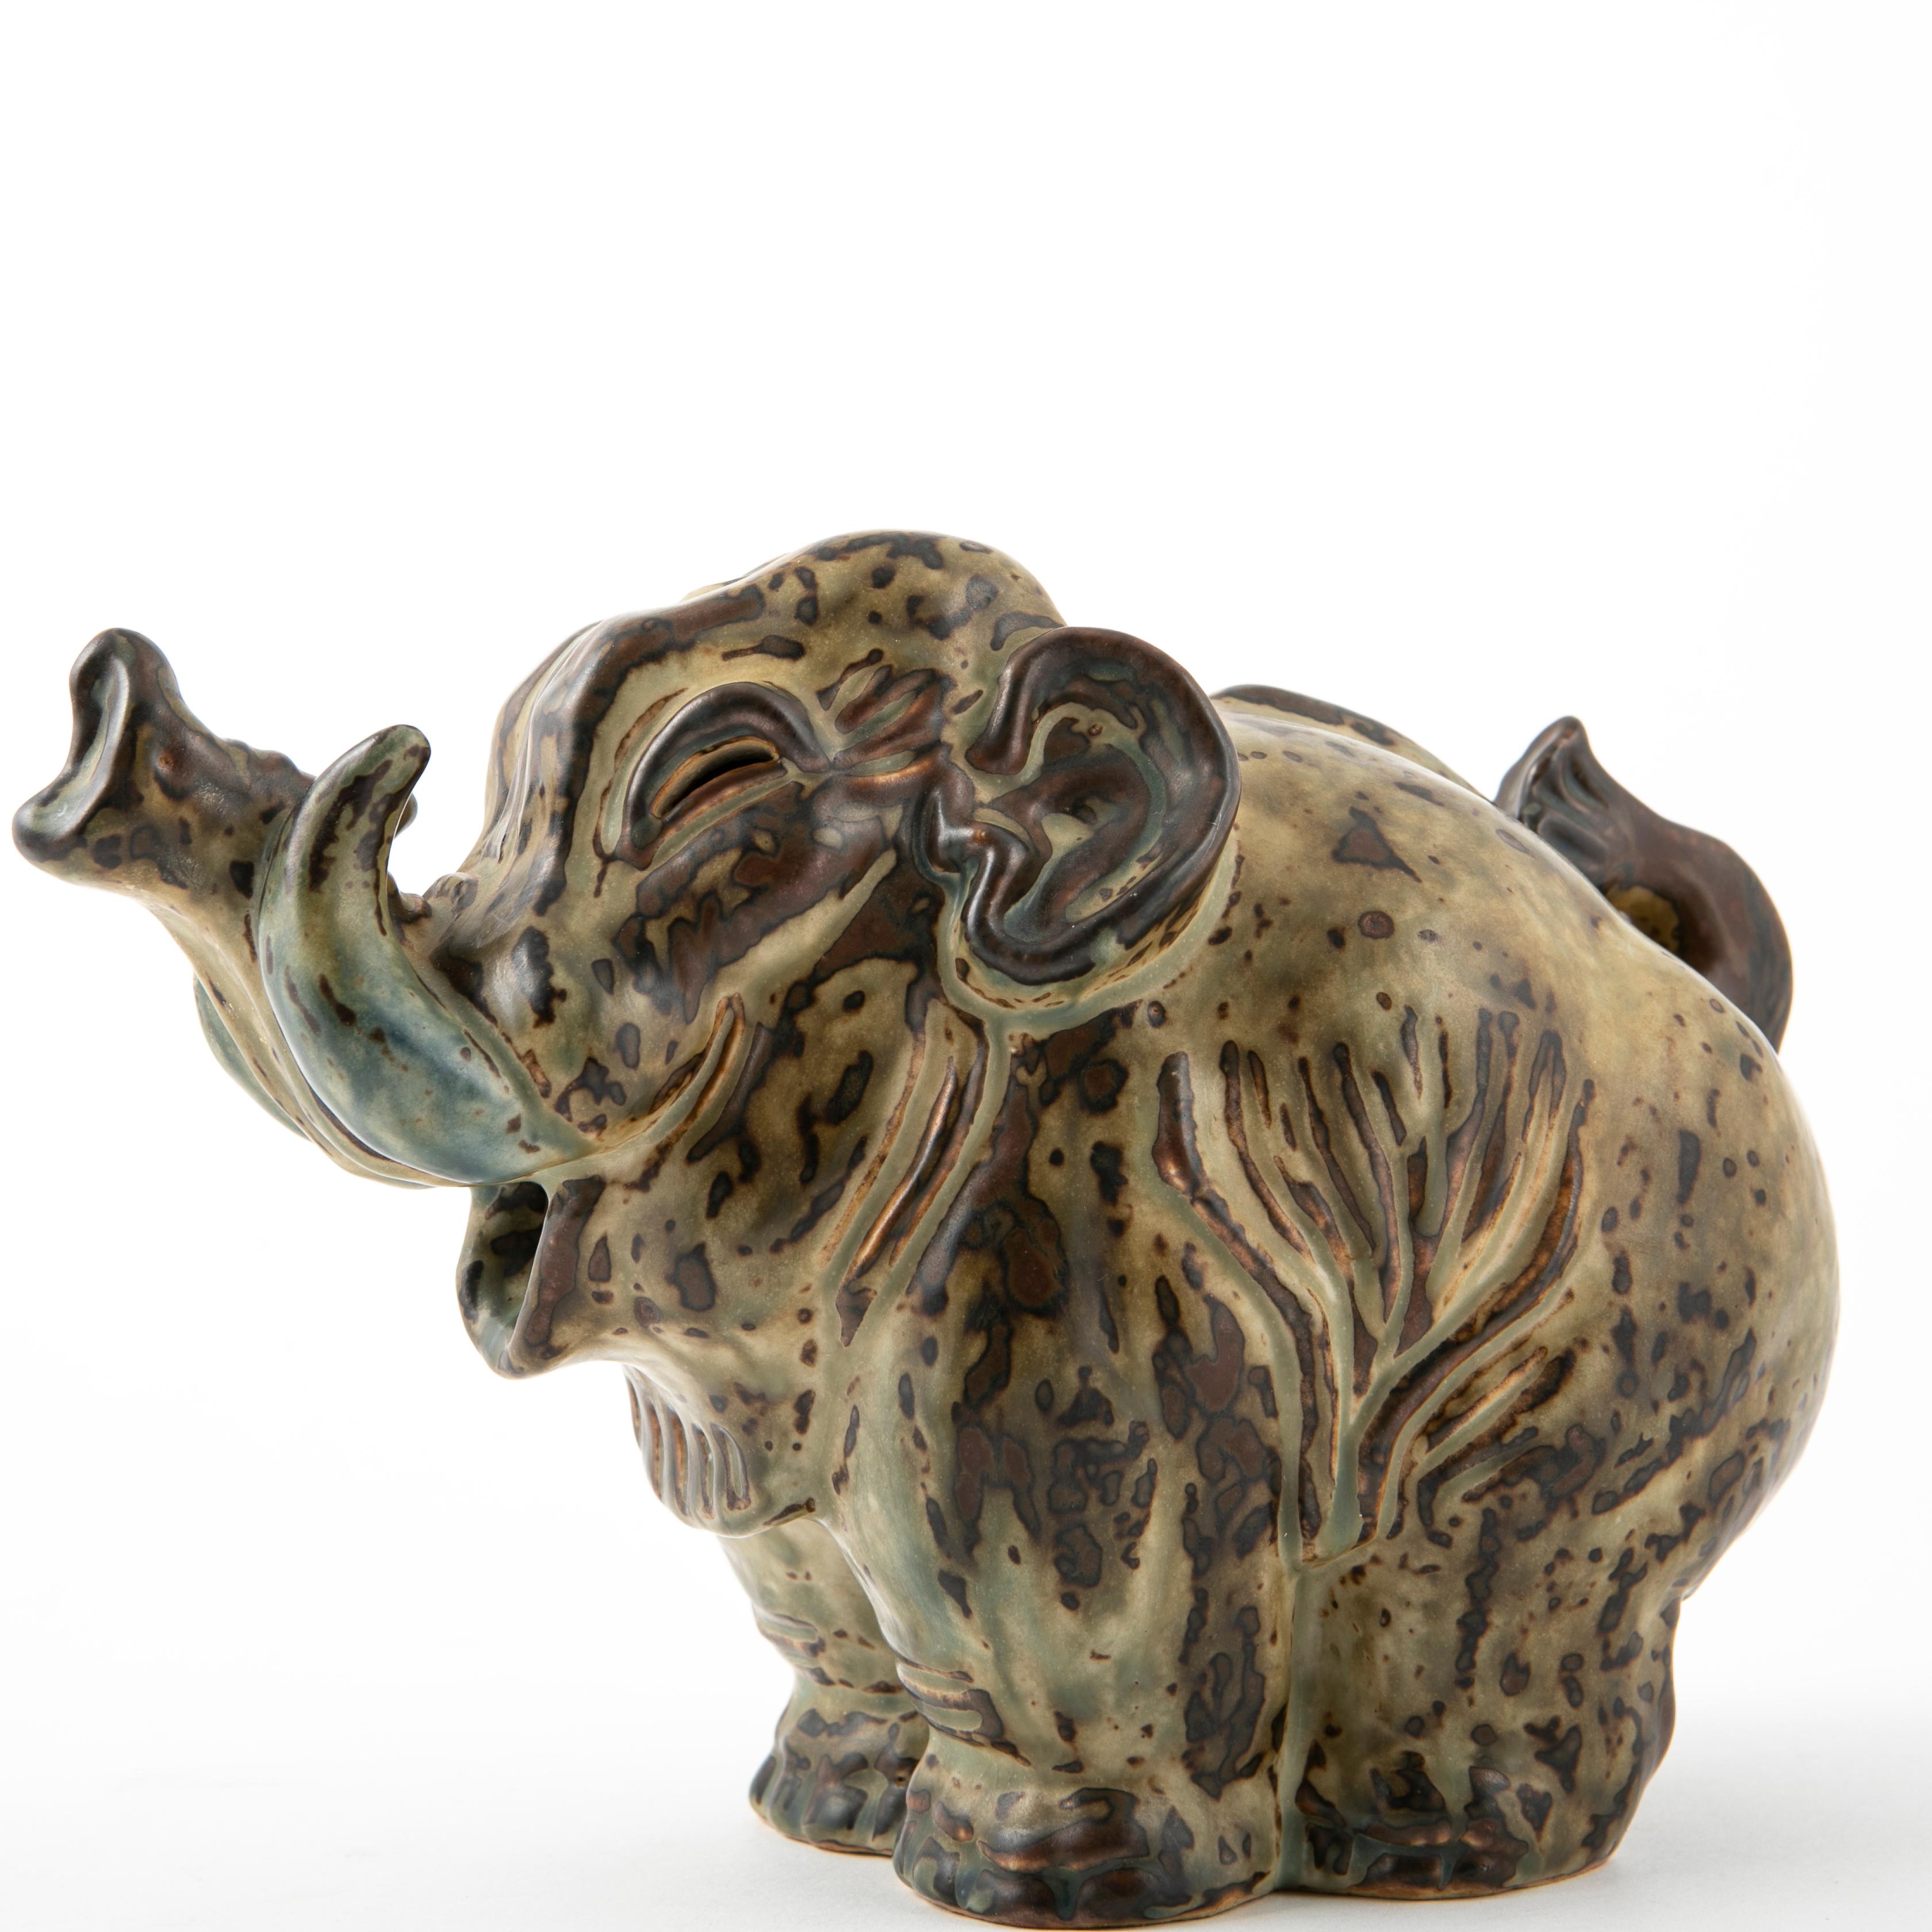 Sung glazed stoneware baby elephant by Knud Kyhn for Royal Copenhagen.
The sculpture is decorated with a light earthy Sung glaze with a touch of green.
Marked and signed KK to the base. No. 20138. Denmark 1950s.
Measures: H: 17 cm W: 23 cm. In